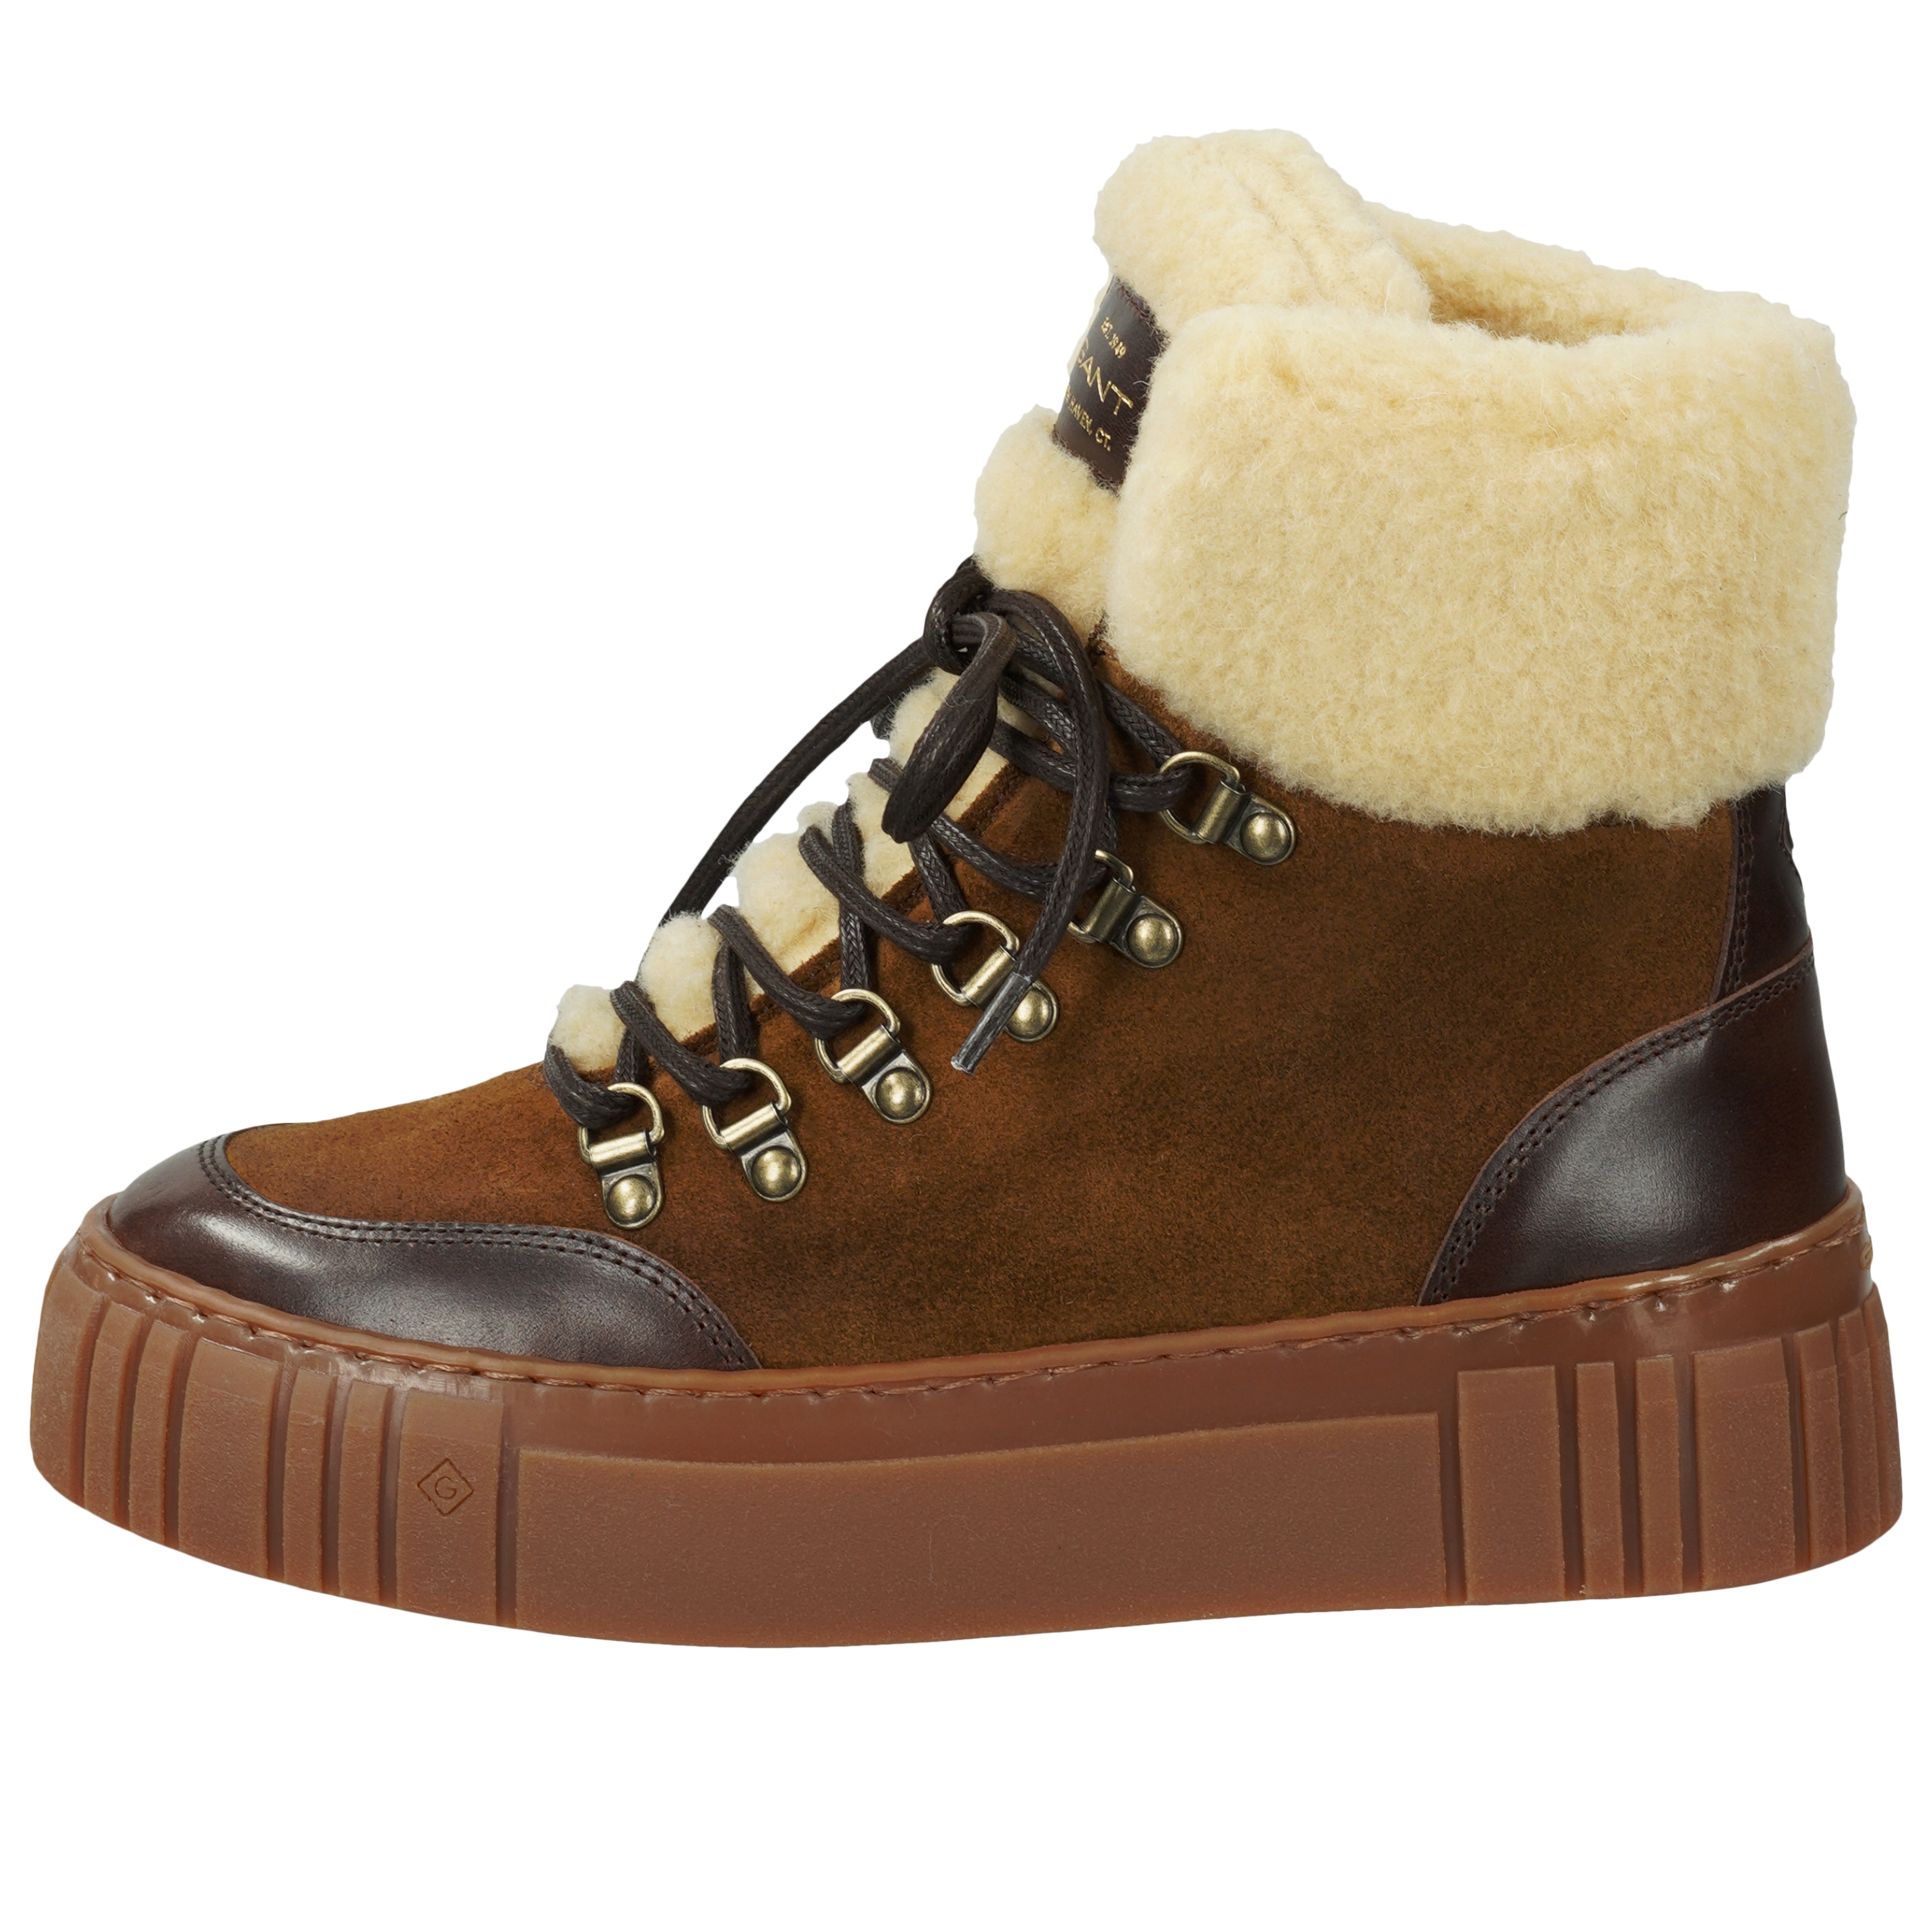 Snowmont - Brown suede leather